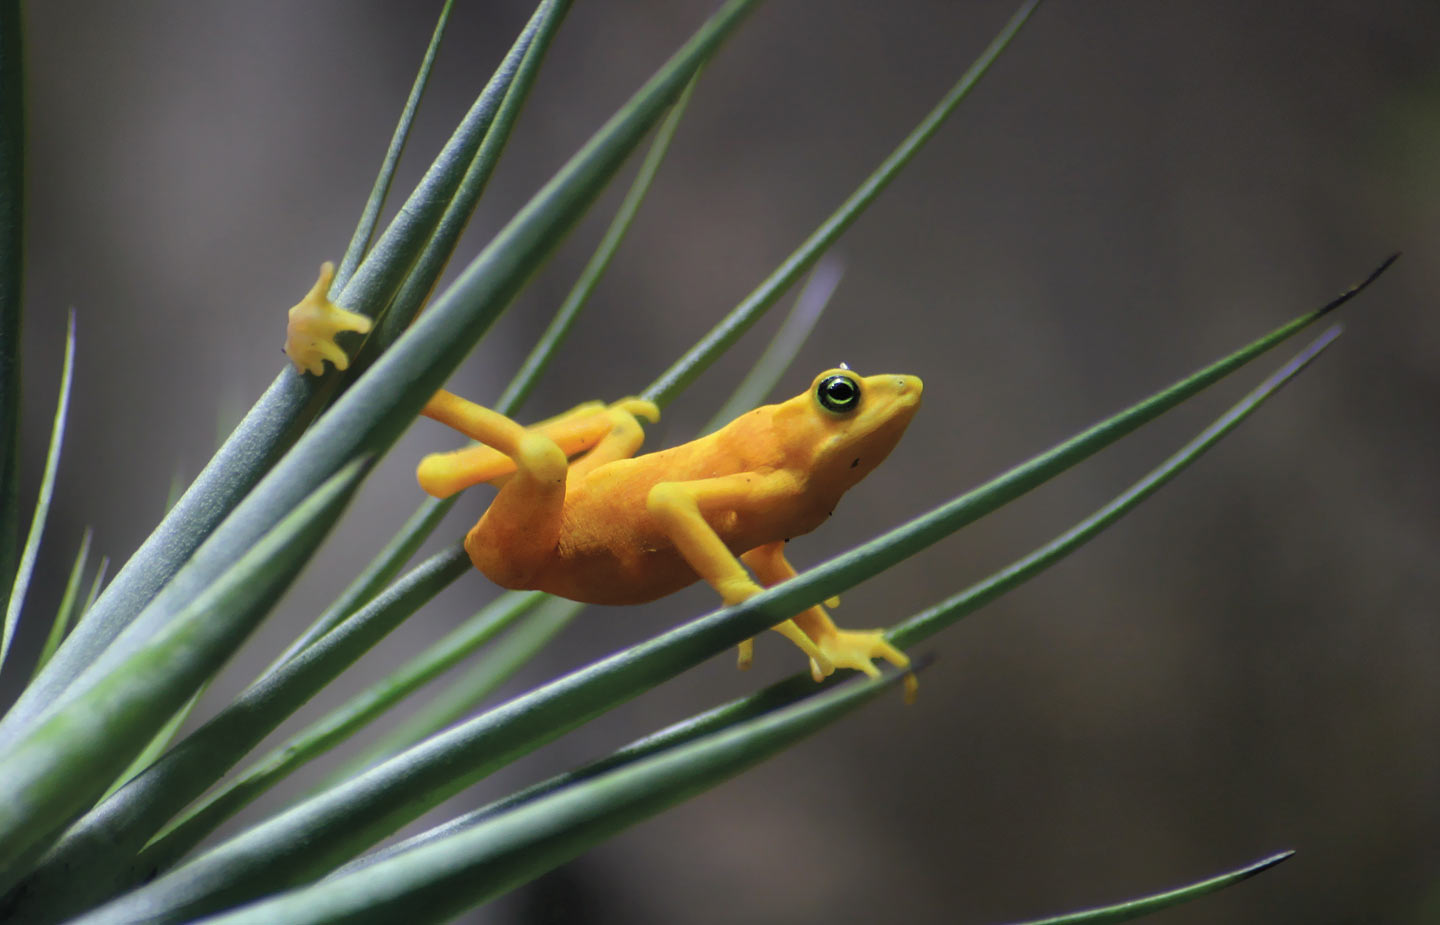 Image of a yellow tropical frog